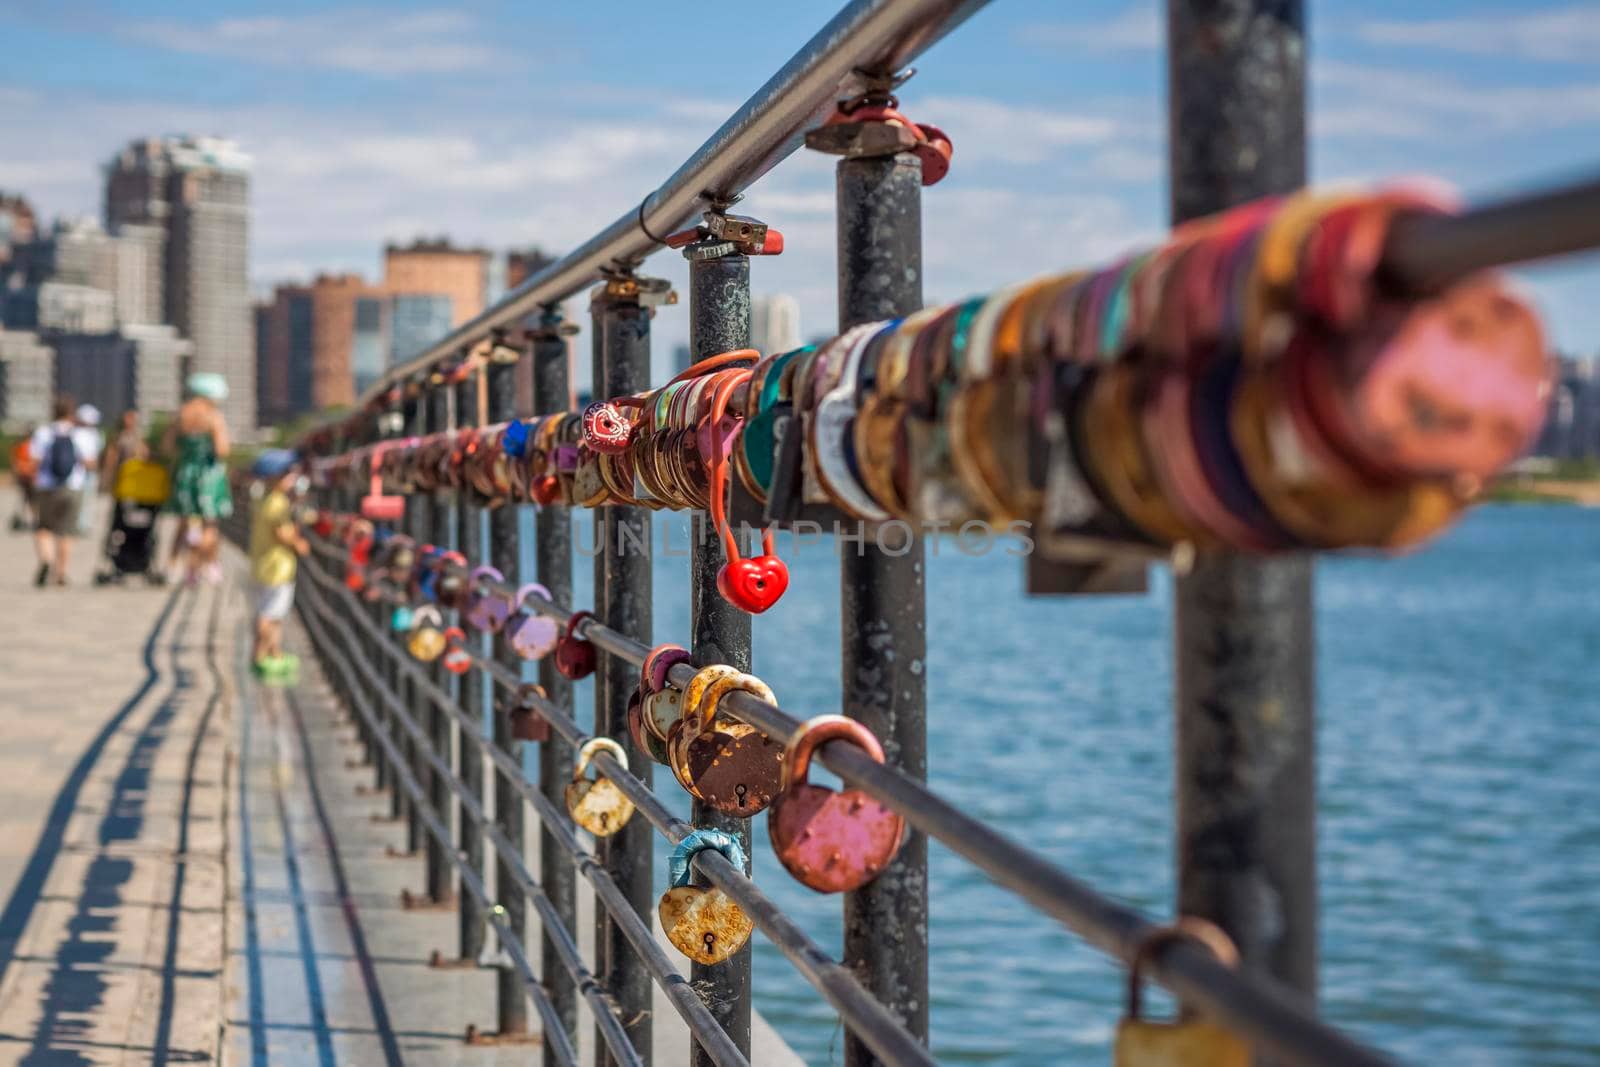 A heart-shaped door lock, a symbol of love and fidelity with a lake in the background, hangs on the fence of the bridge. The heart-shaped castle symbolizes loyalty and love.